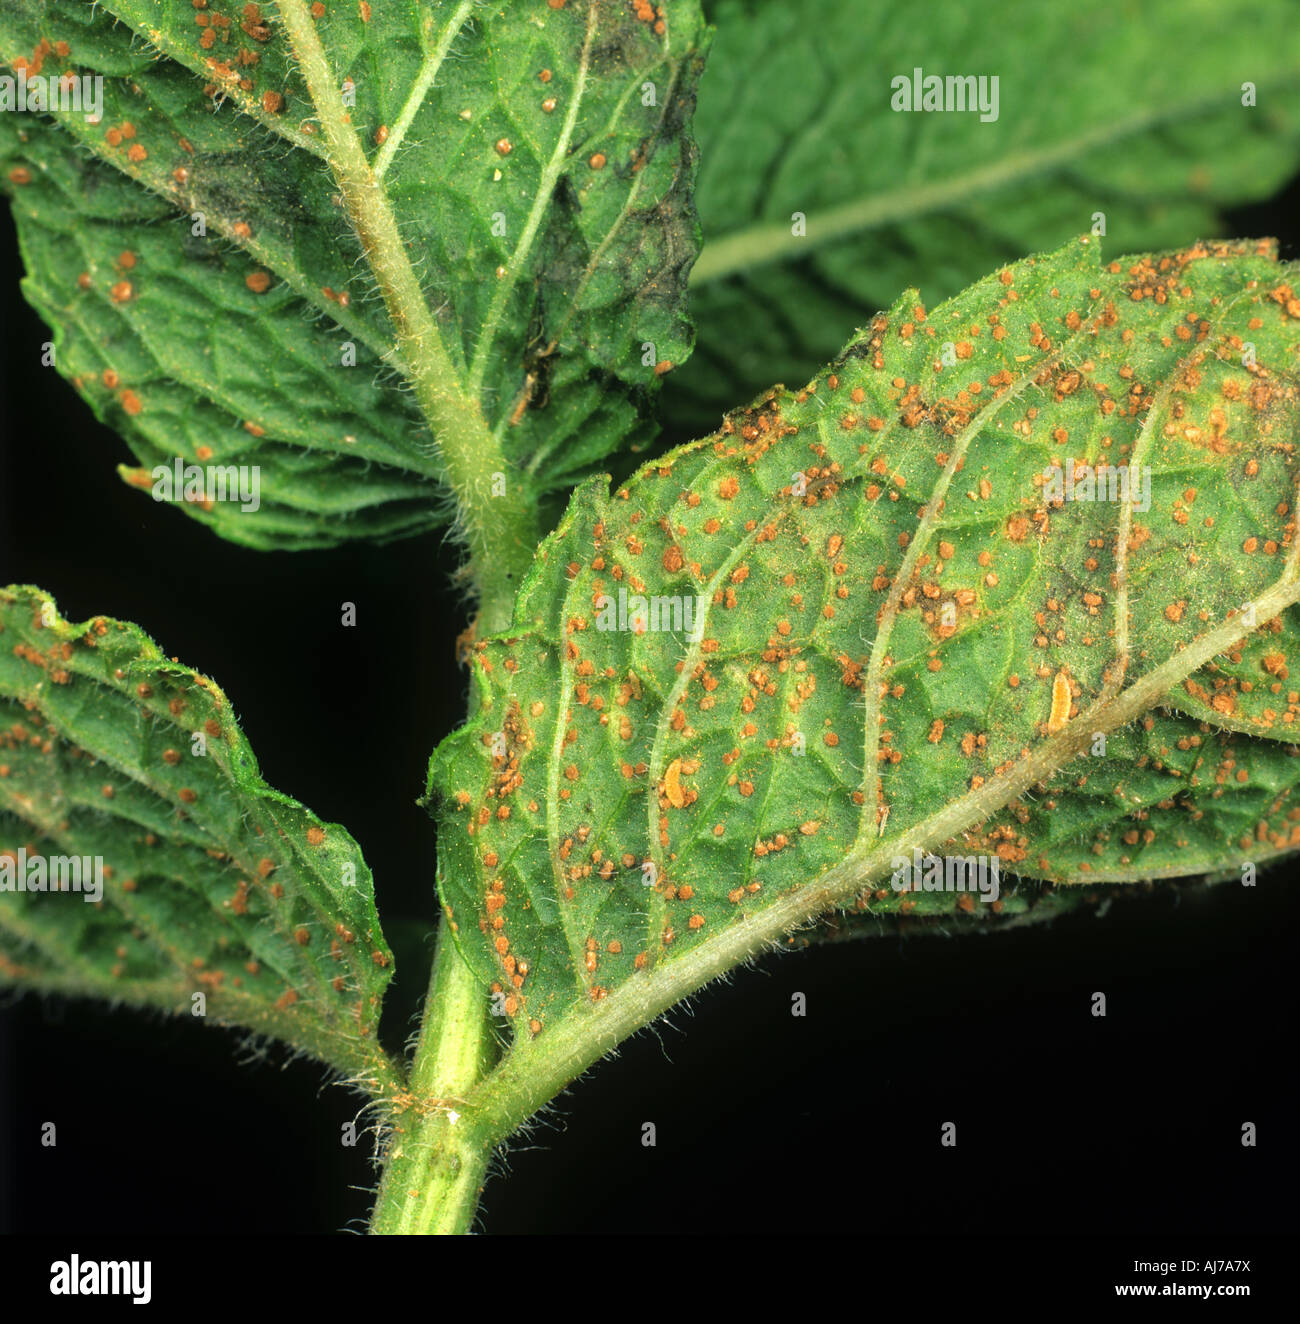 Mint rust Puccinia menthae on peppermint plants leaves Stock Photo